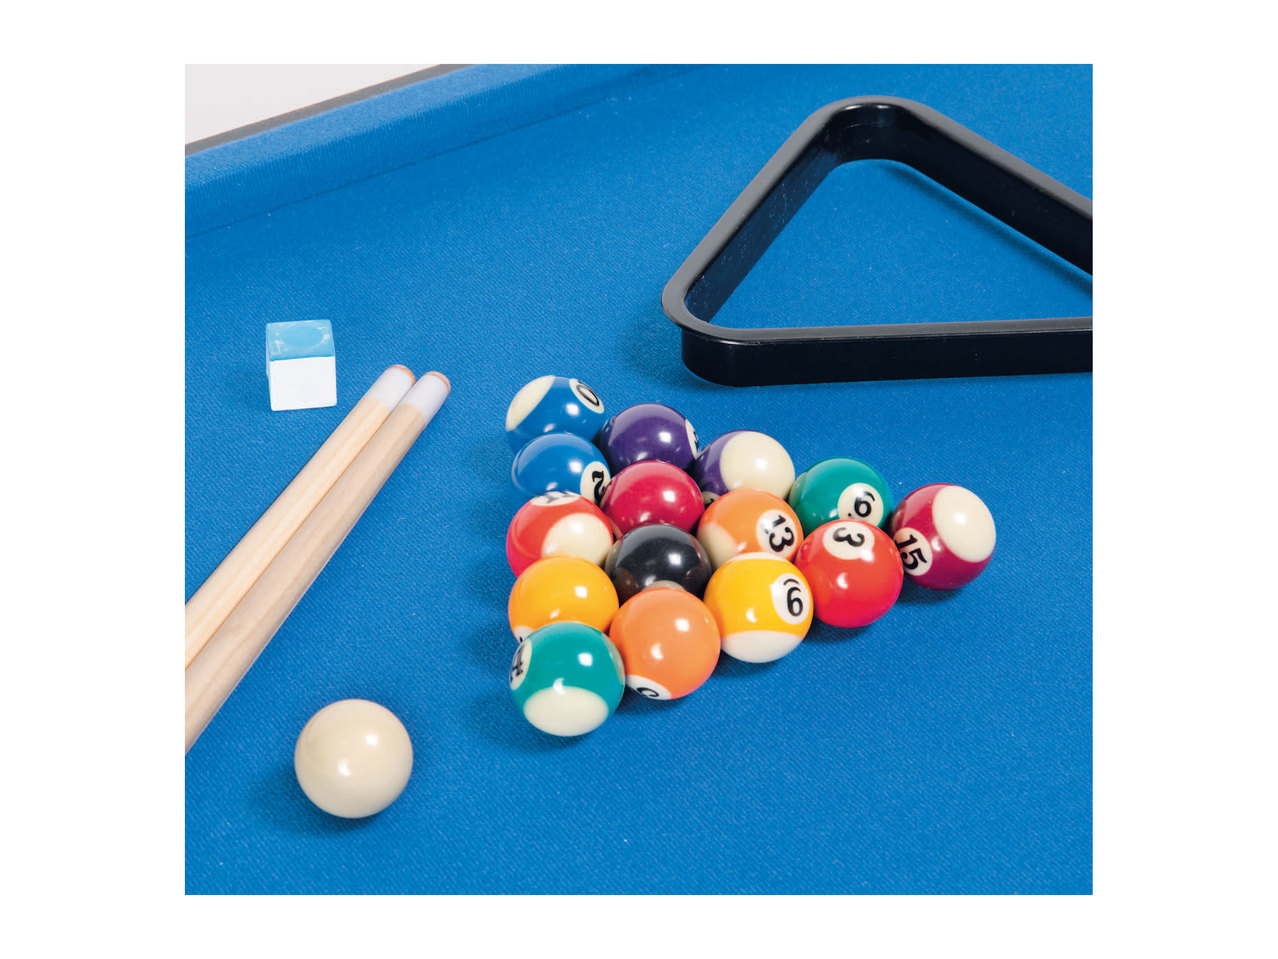 Playtive 16-in-1 Multi Games Table1